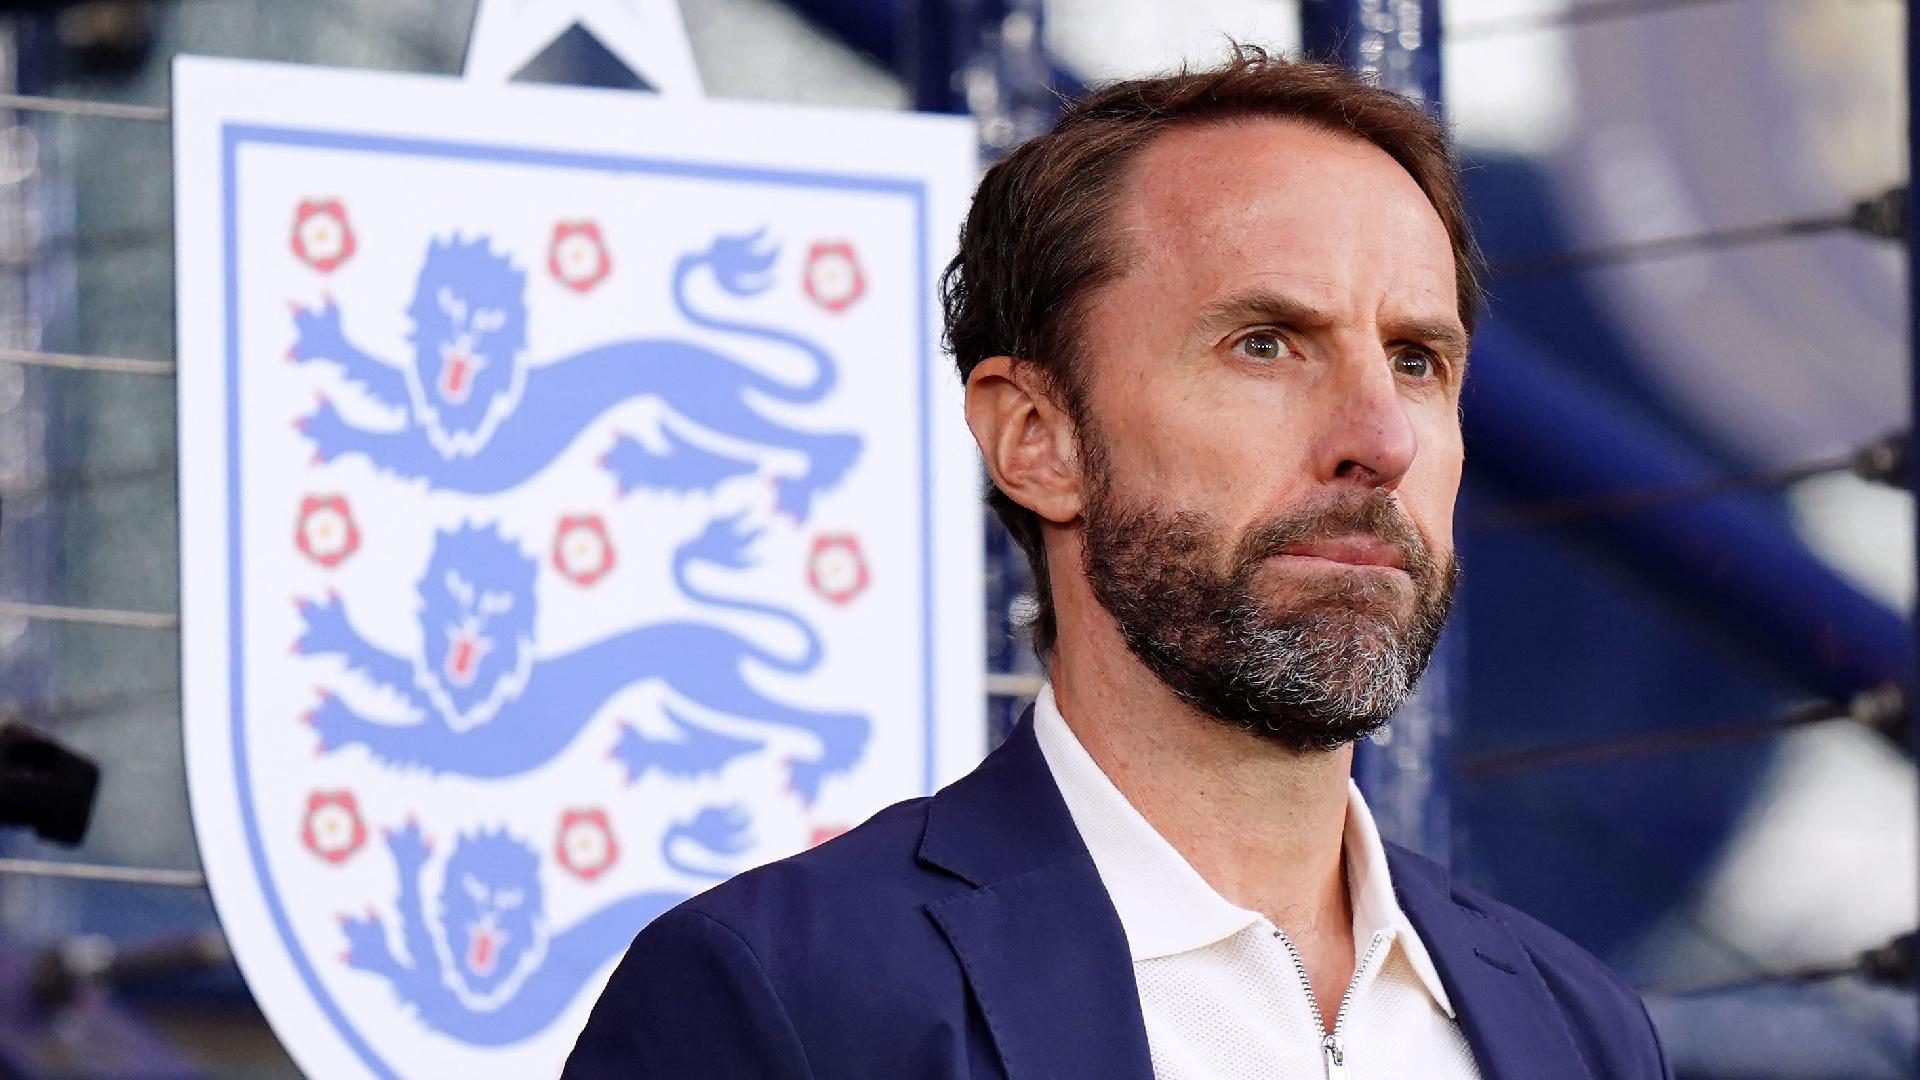 Southgate says experimental England must have right mindset against Australia